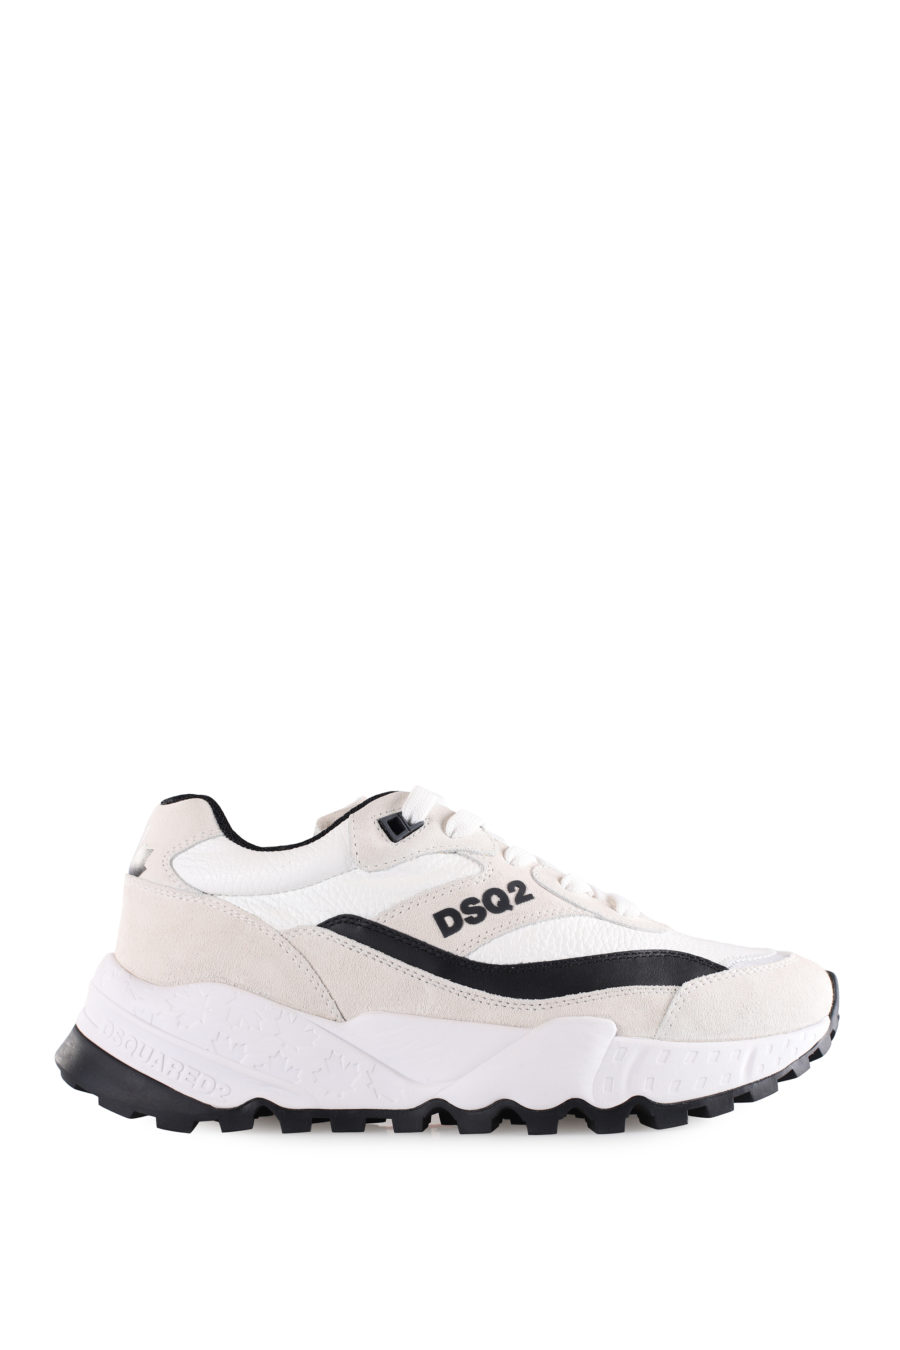 White trainers with "Dsq2" logo and black details - IMG 9498